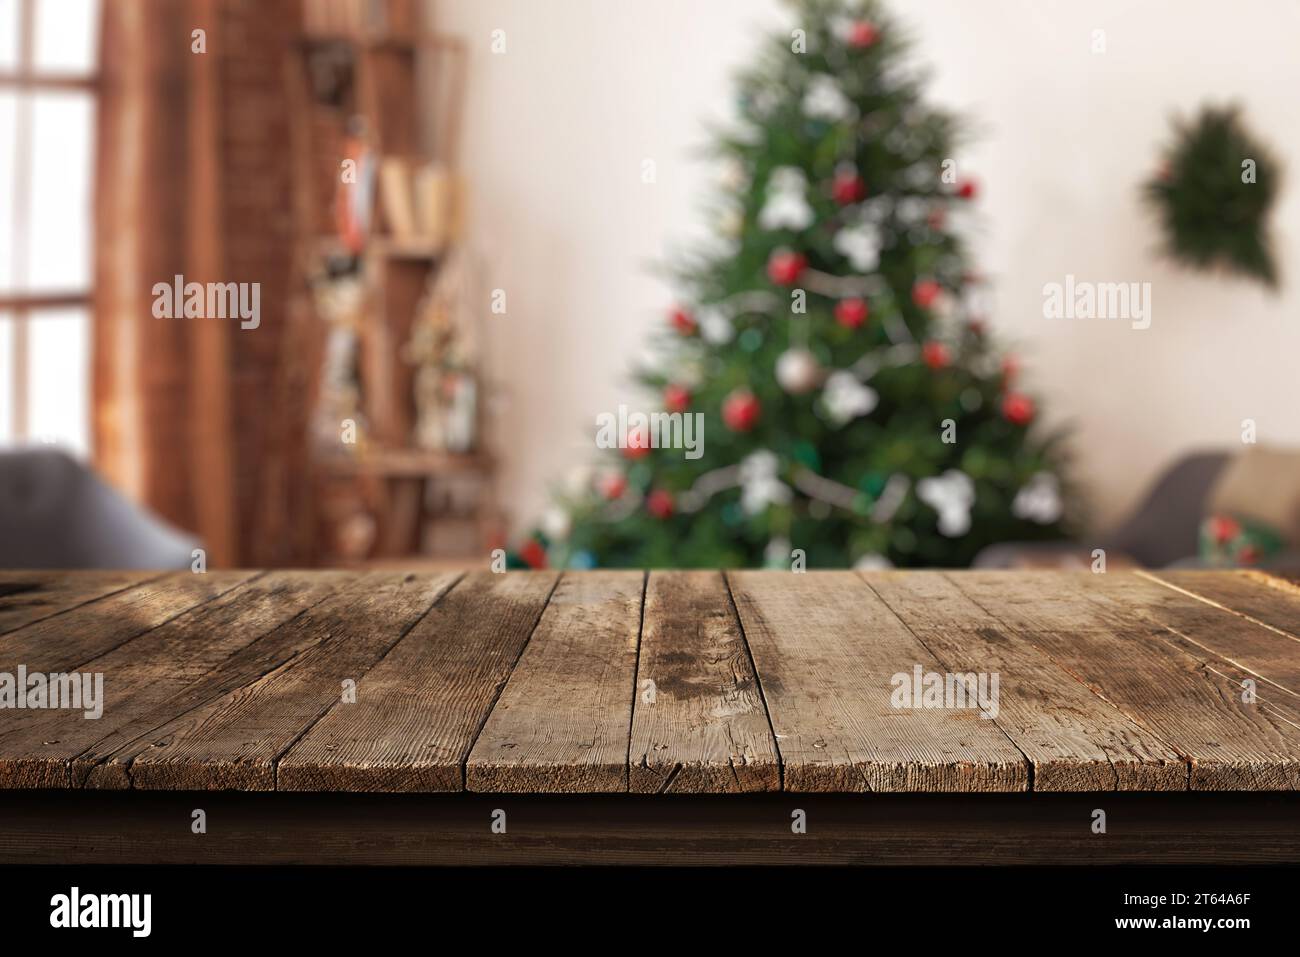 Wooden desk in a home living room with a Christmas tree and festive decorations in the background. Perfect setting for a warm and inviting holiday atm Stock Photo